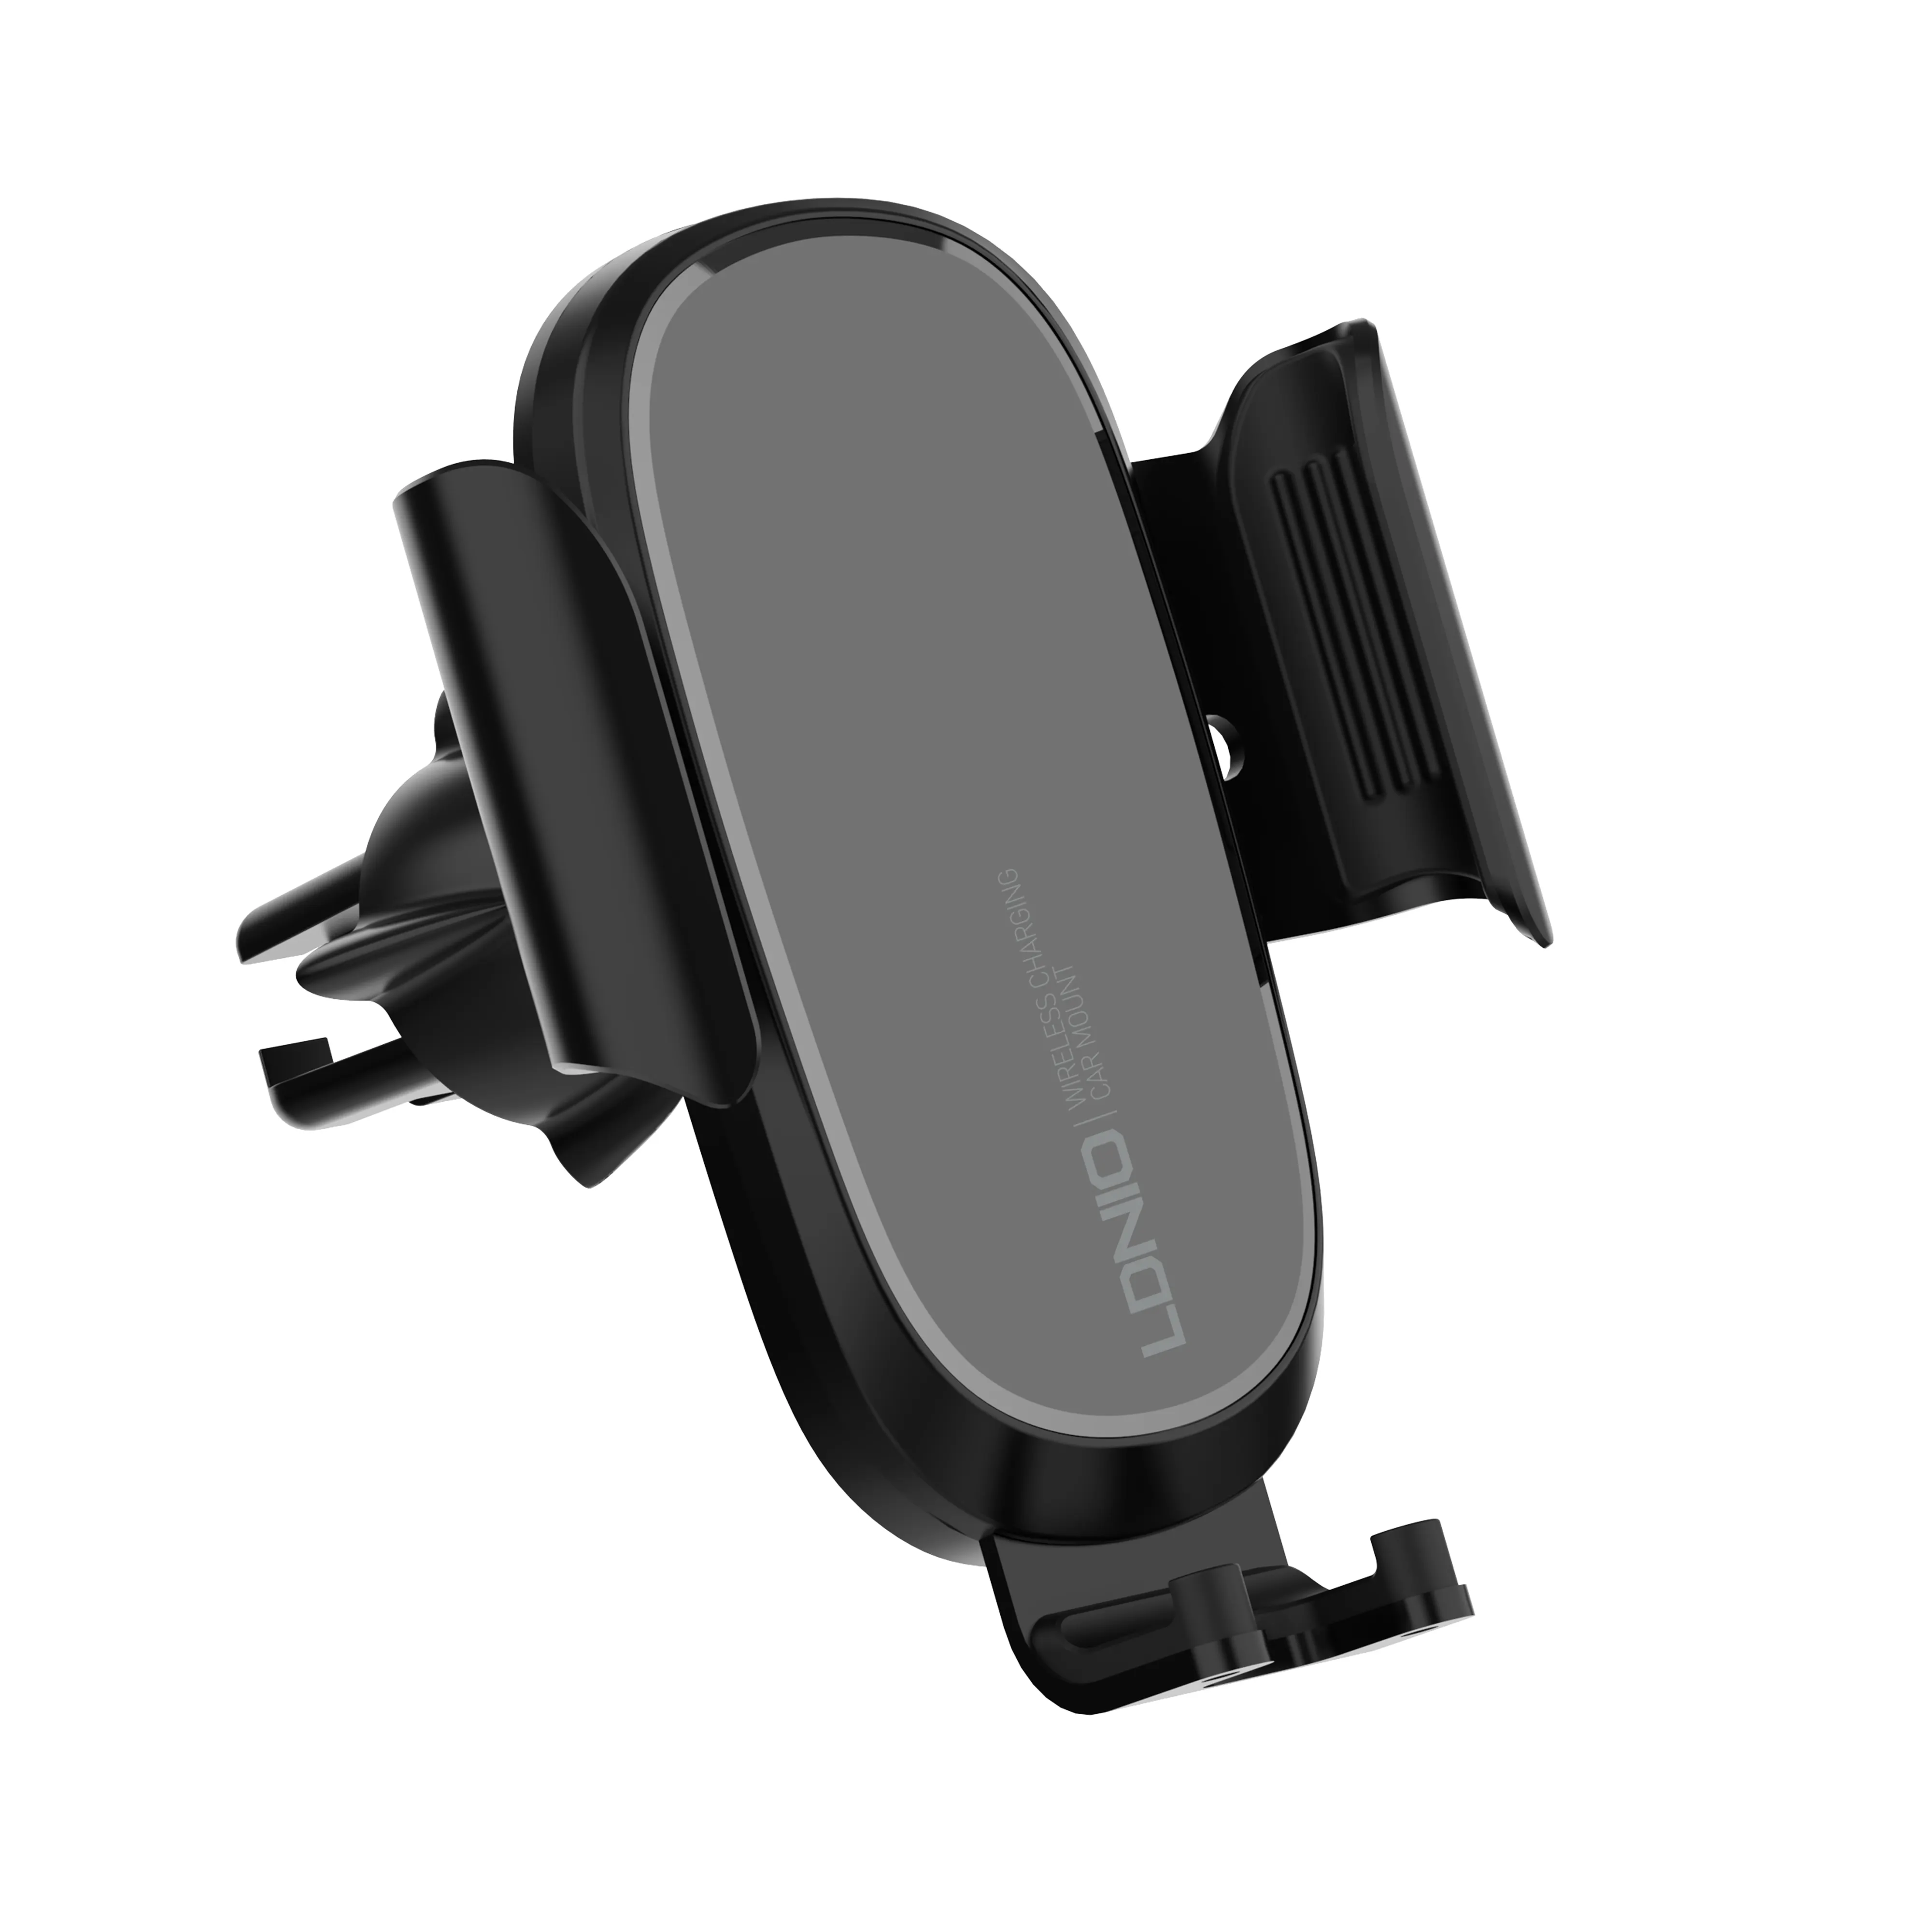 LDNIO MW21 Black Color Automatic Car Mount 15W Wireless Charger Car Phone Holder With Adjustable Air Vent Holder For Cell Phone